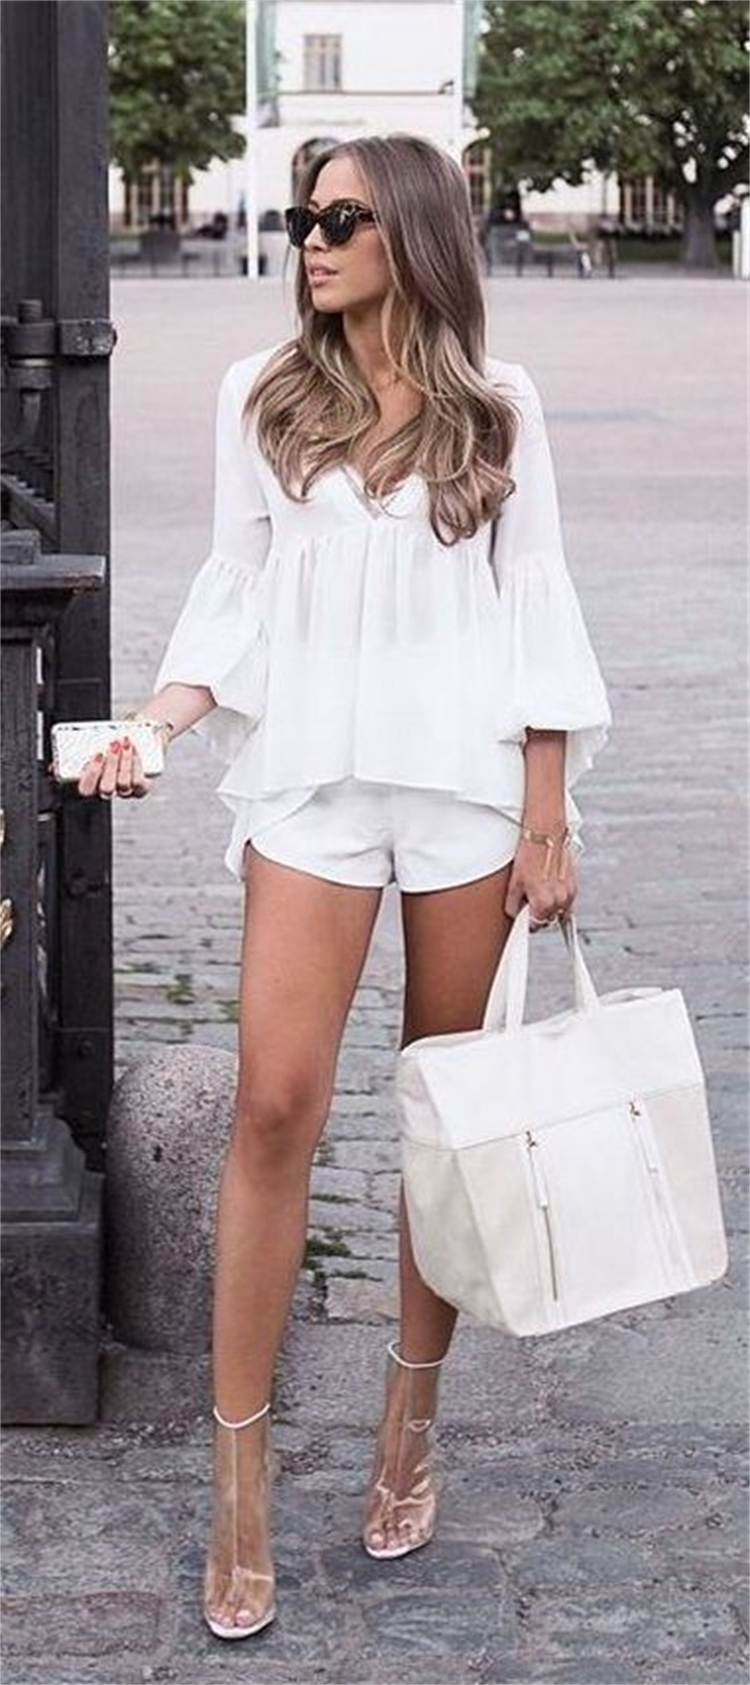 Gorgeous All White Outfits To Make You Glamorous; White Outfits; White Pants Outfits; Outfits; White Dress; One-piece Dress; White Shorts Outfits; #partyoutfits #outfits #whiteoutfits #whitepantsoutfits #whiteshortsoutfits #whitedress #summerwhiteoutfits #summeroutfits